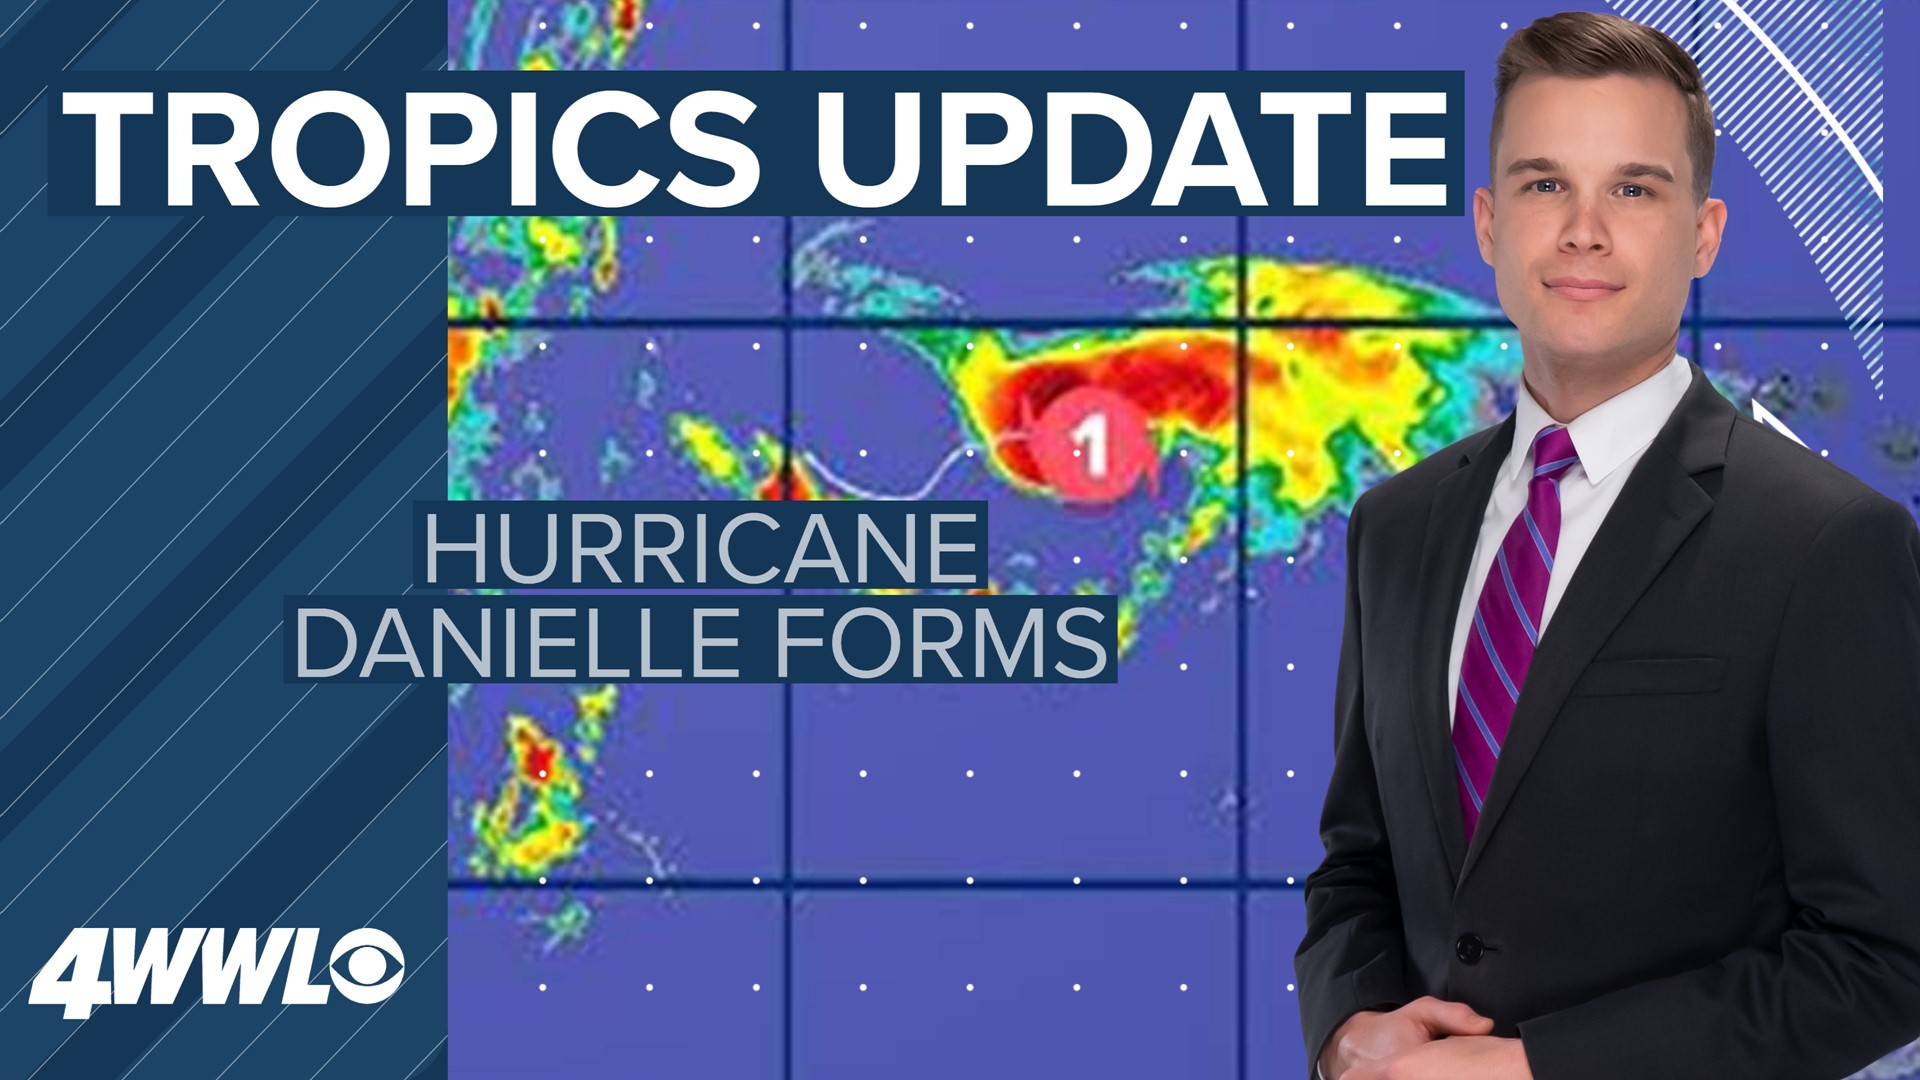 Meteorologist Payton Malone says in the Friday 10AM tropical update that Hurricane Danielle has formed and there are 2 other spots to watch.